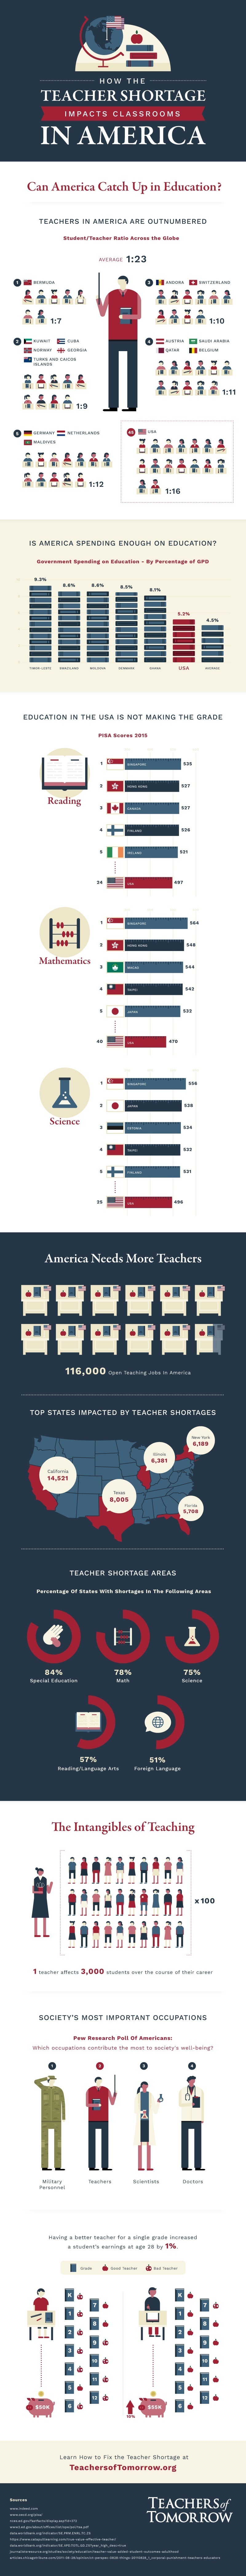 How The Teacher Shortage Affects Classrooms In America Infographic